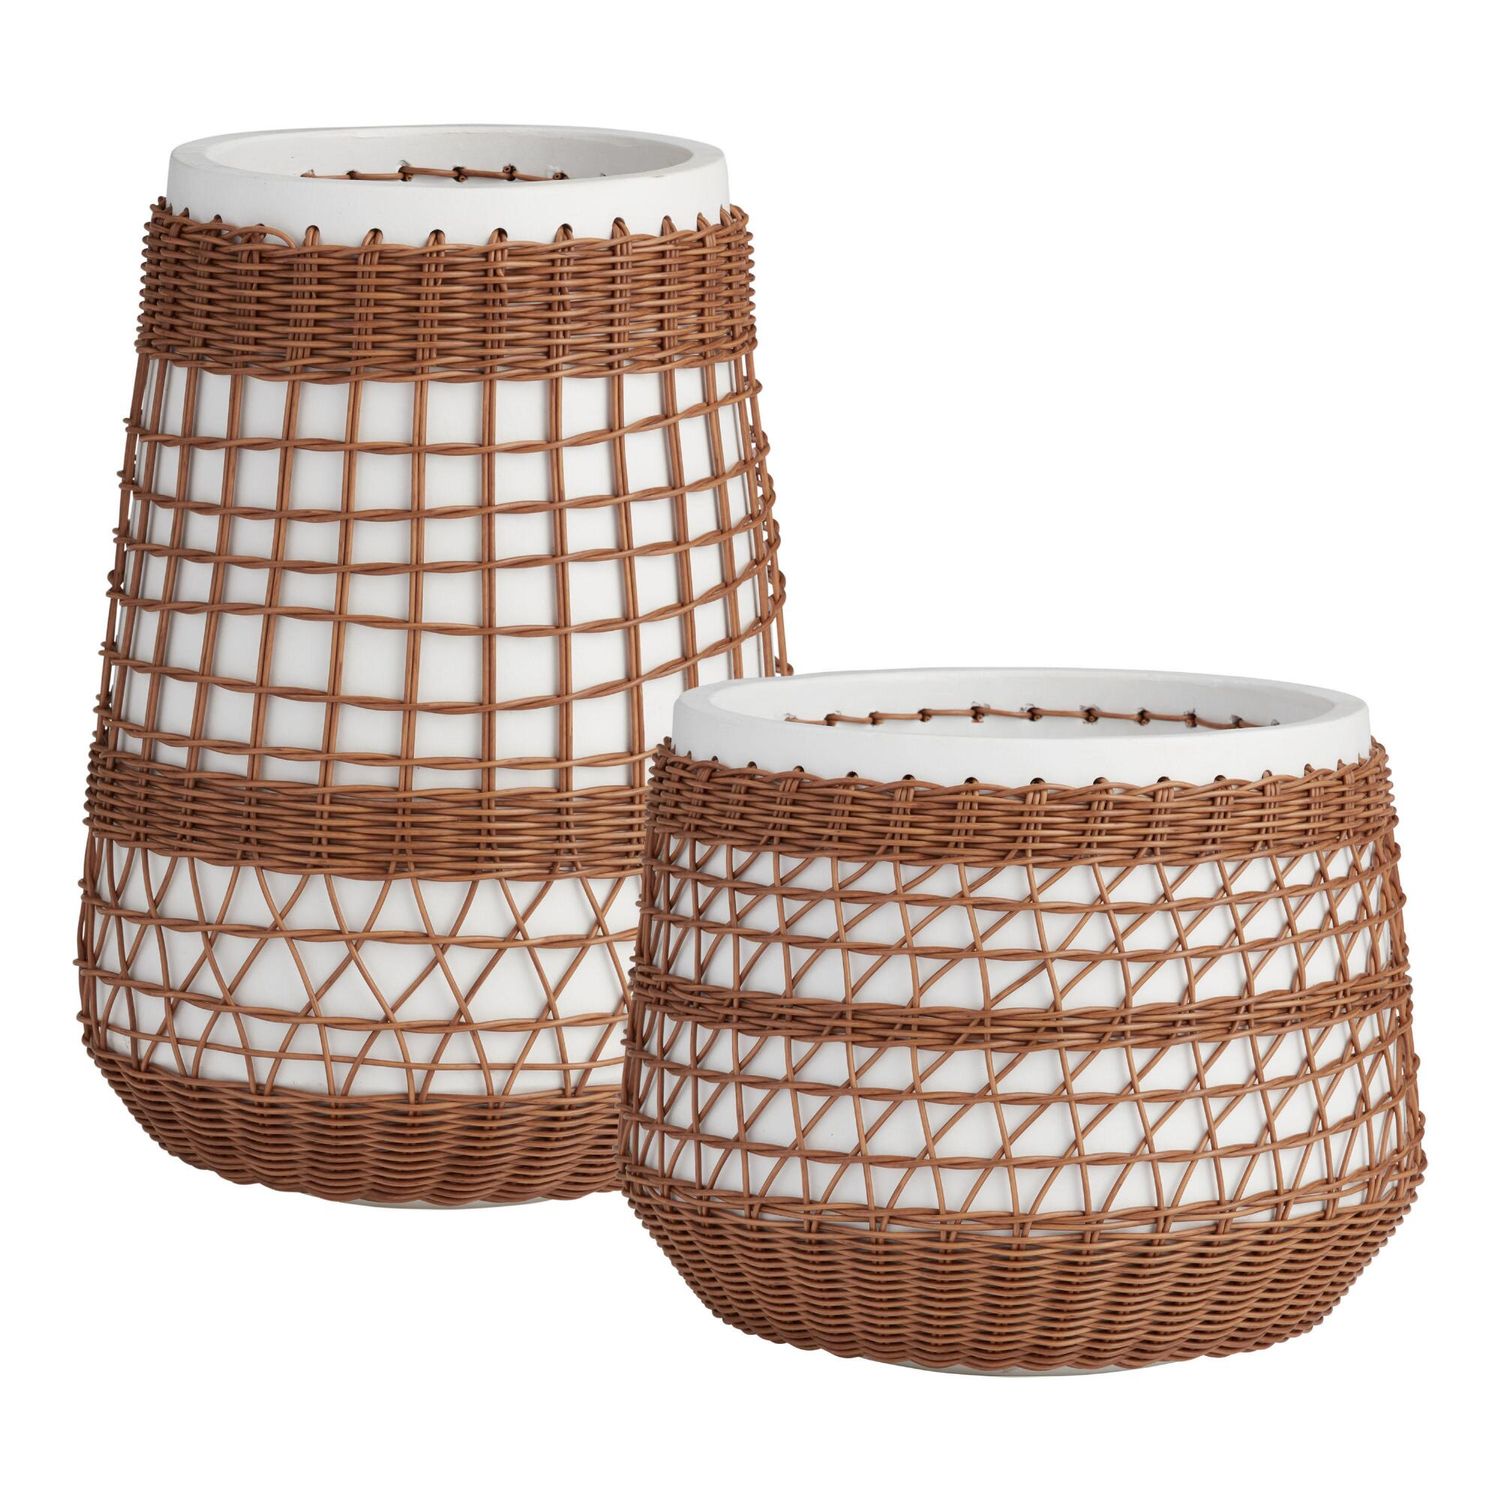 Shop All Weather Wicker Overlay Meagan Outdoor Planter from World Market on Openhaus